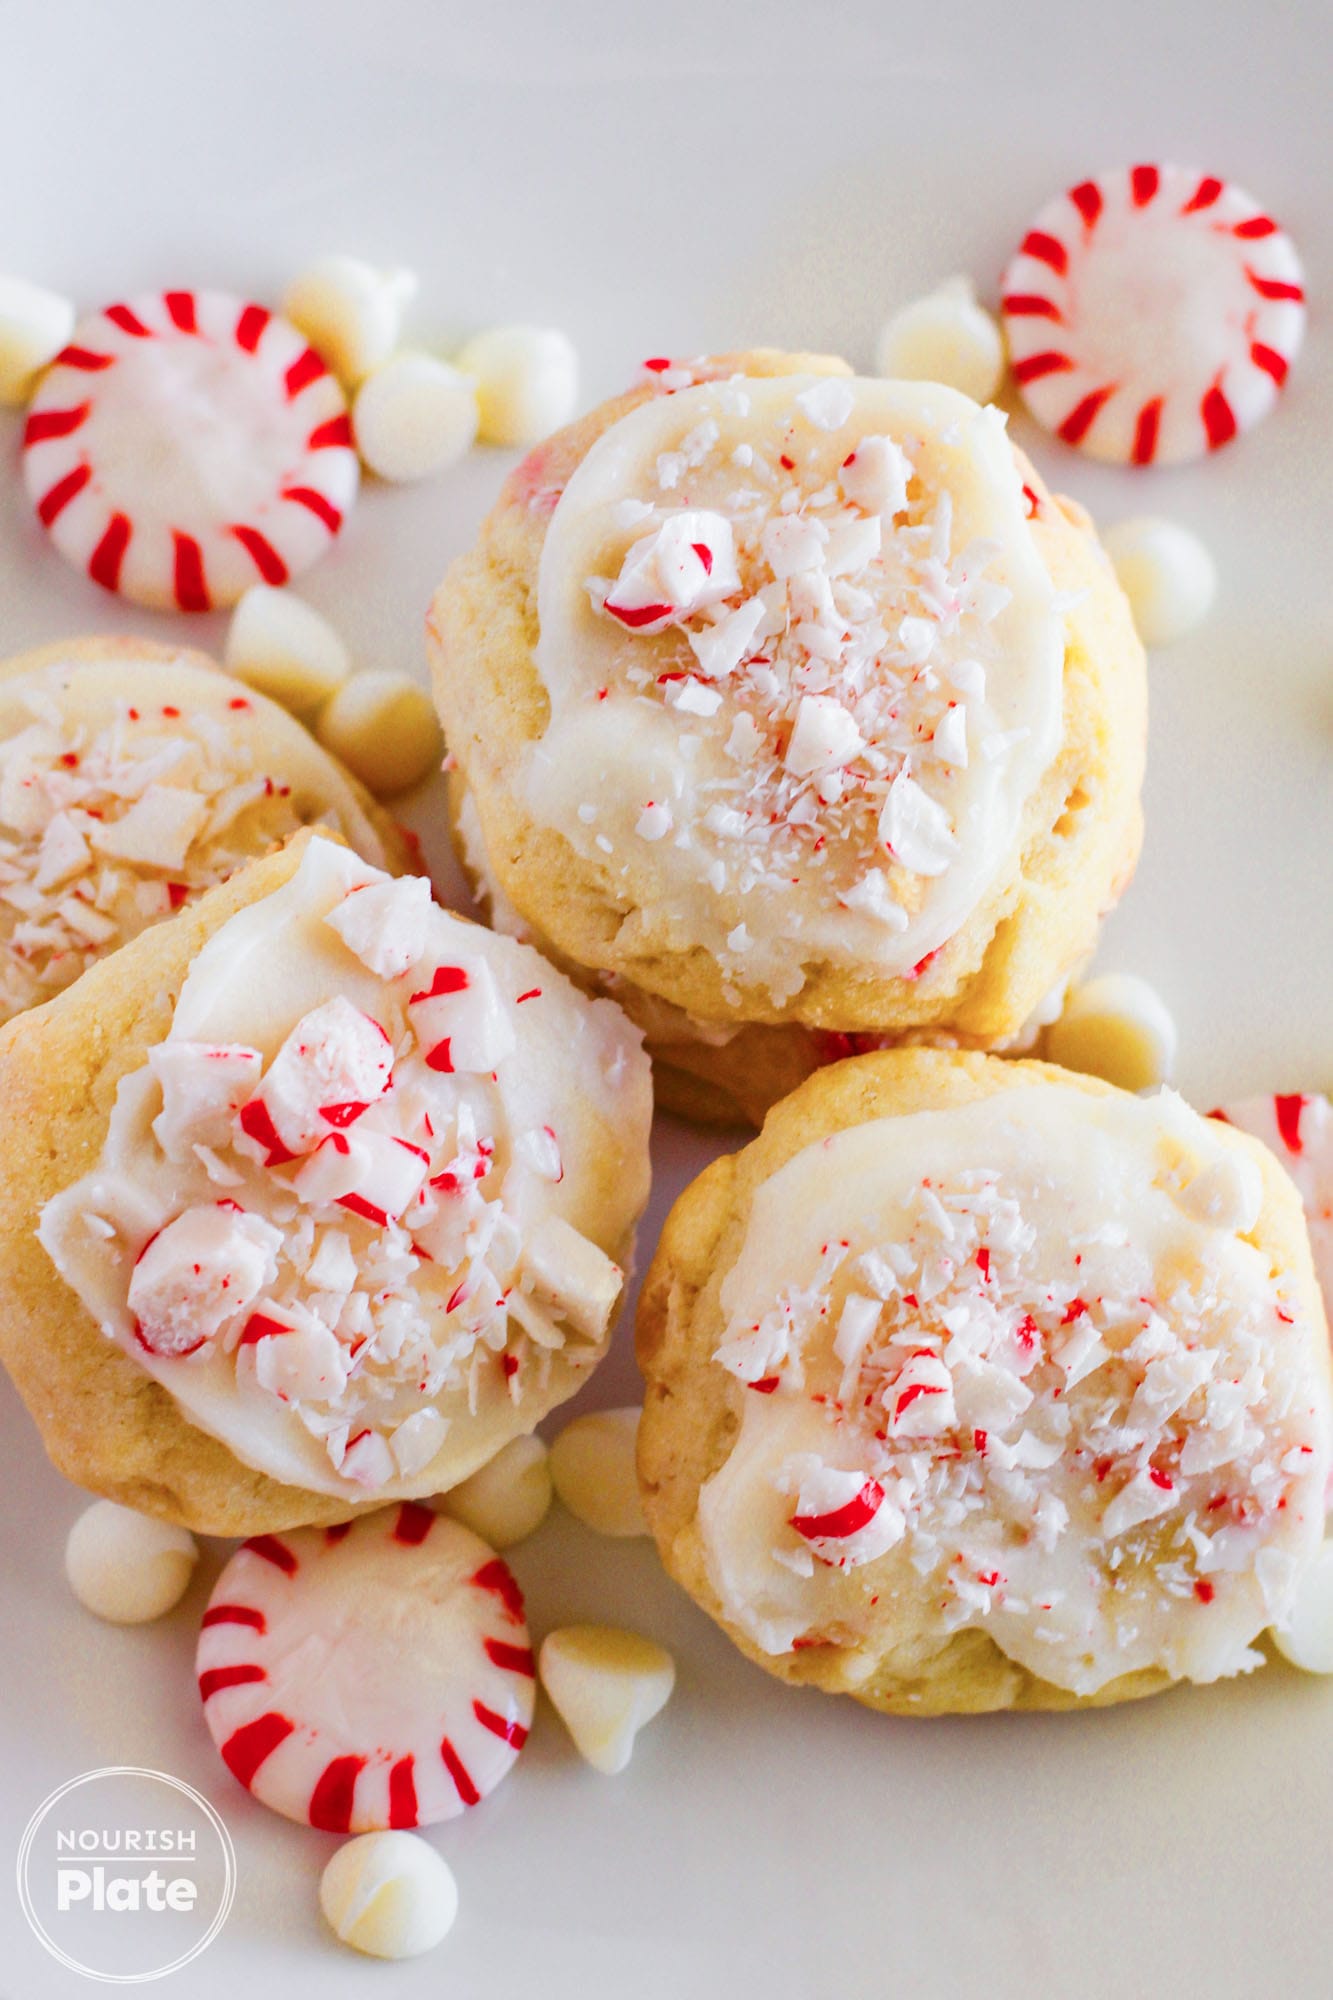 Overhead shot of 3 White Chocolate Peppermint Cookies, and peppermint candies.